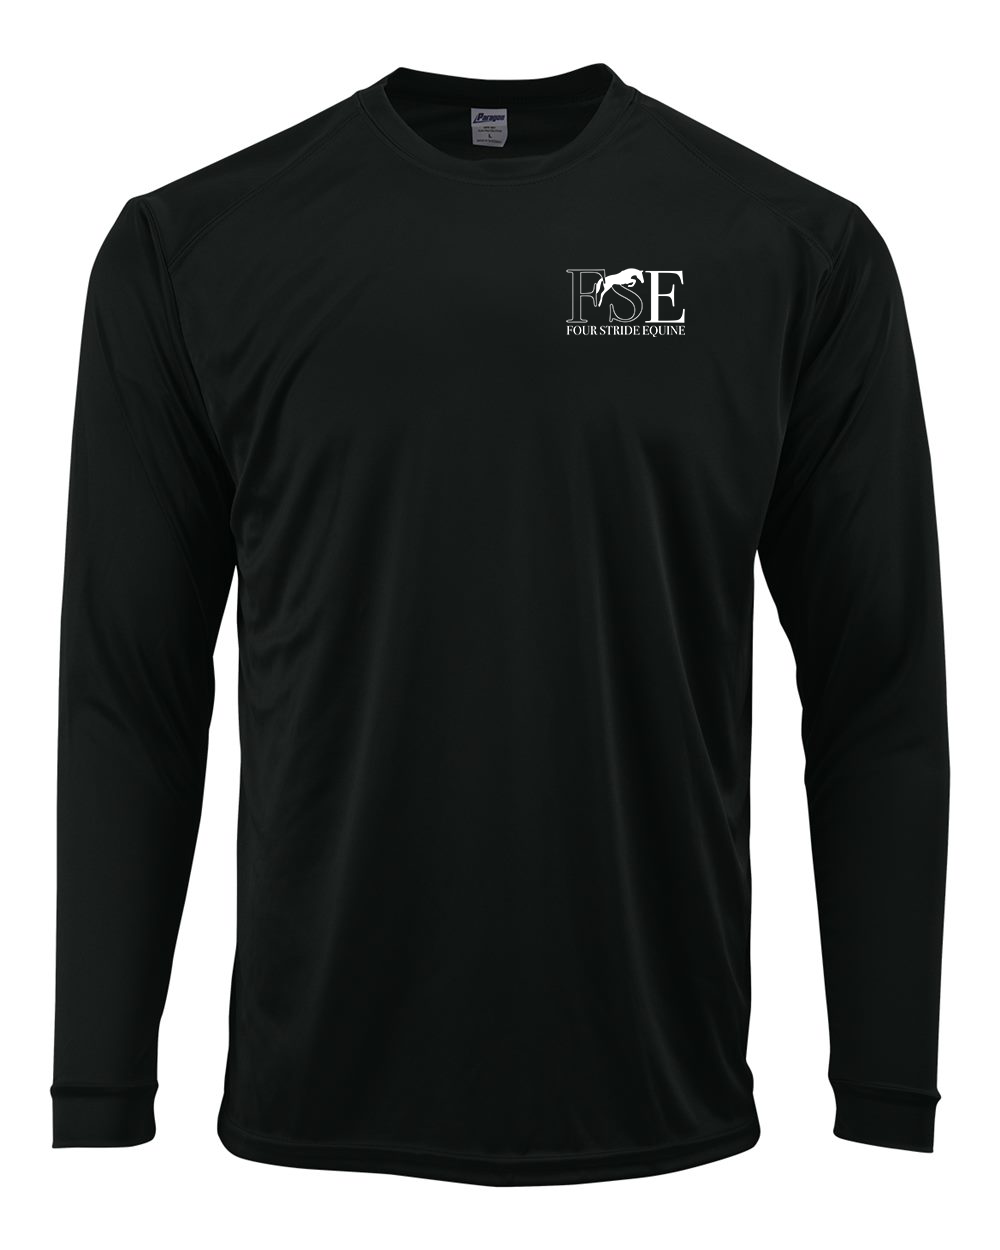 Four Stride Equine - Youth Long Islander Performance Long Sleeve T-Shirt